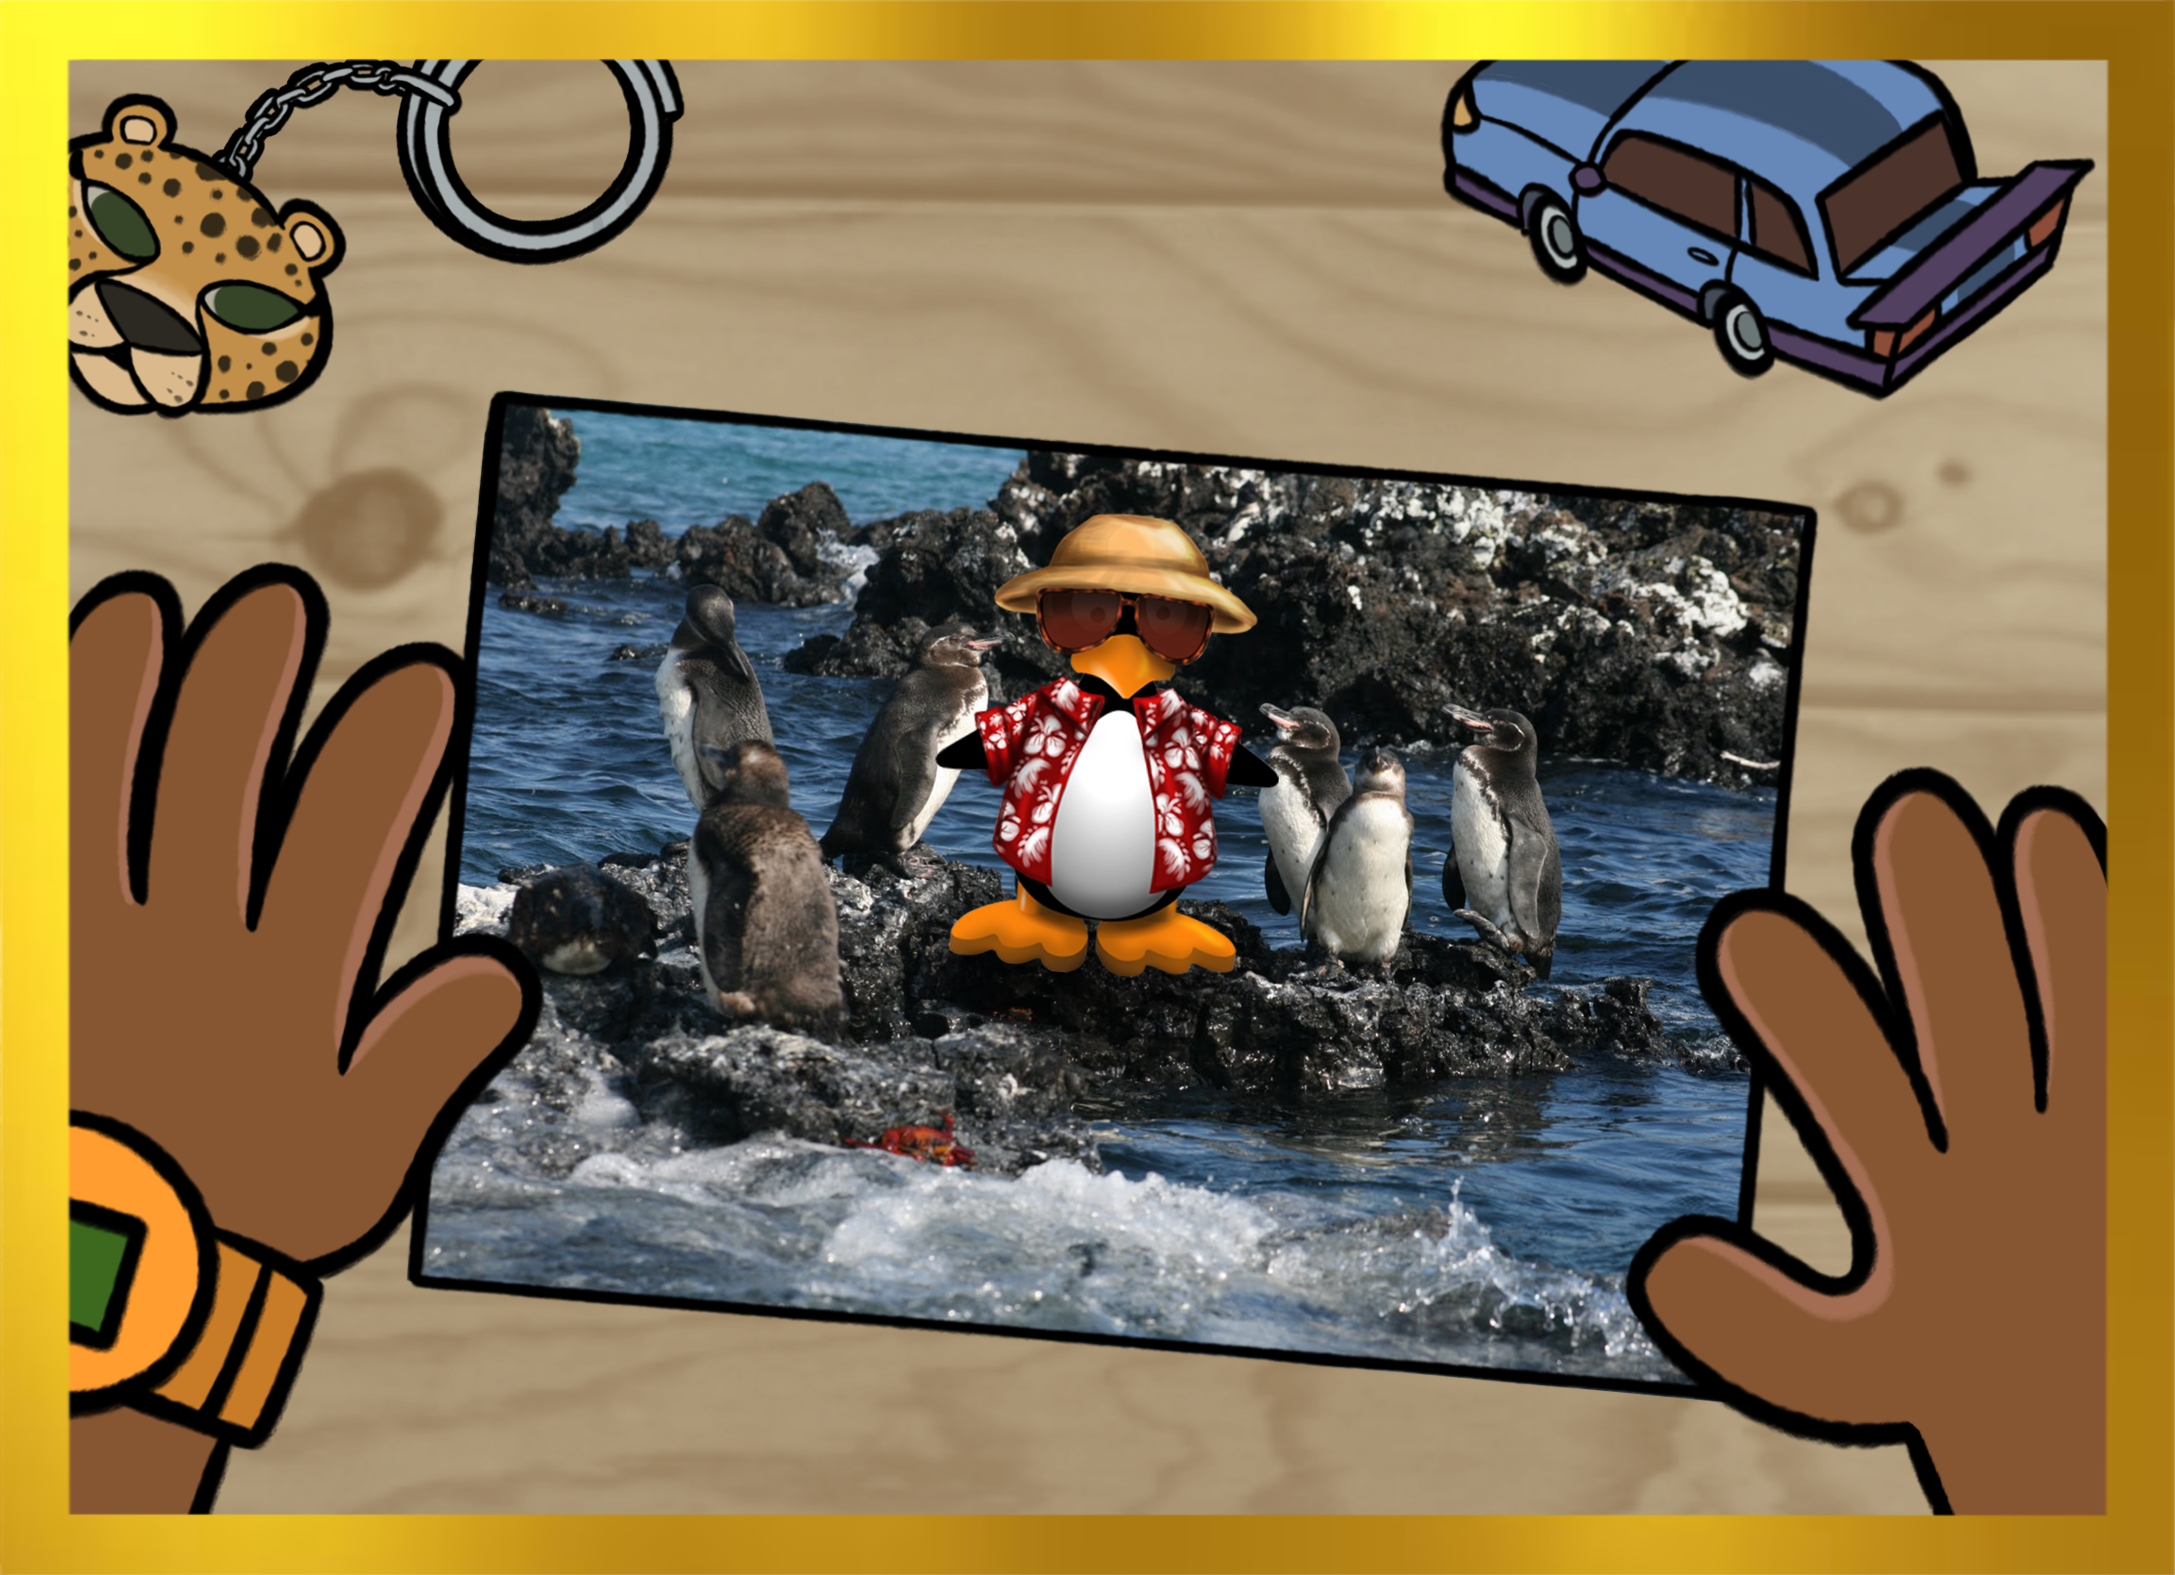 A postcard with a picture of JiJi wearing a Hawaiian shirt and sunglasses. They are standing on some rocks with some photorealistic penguins.